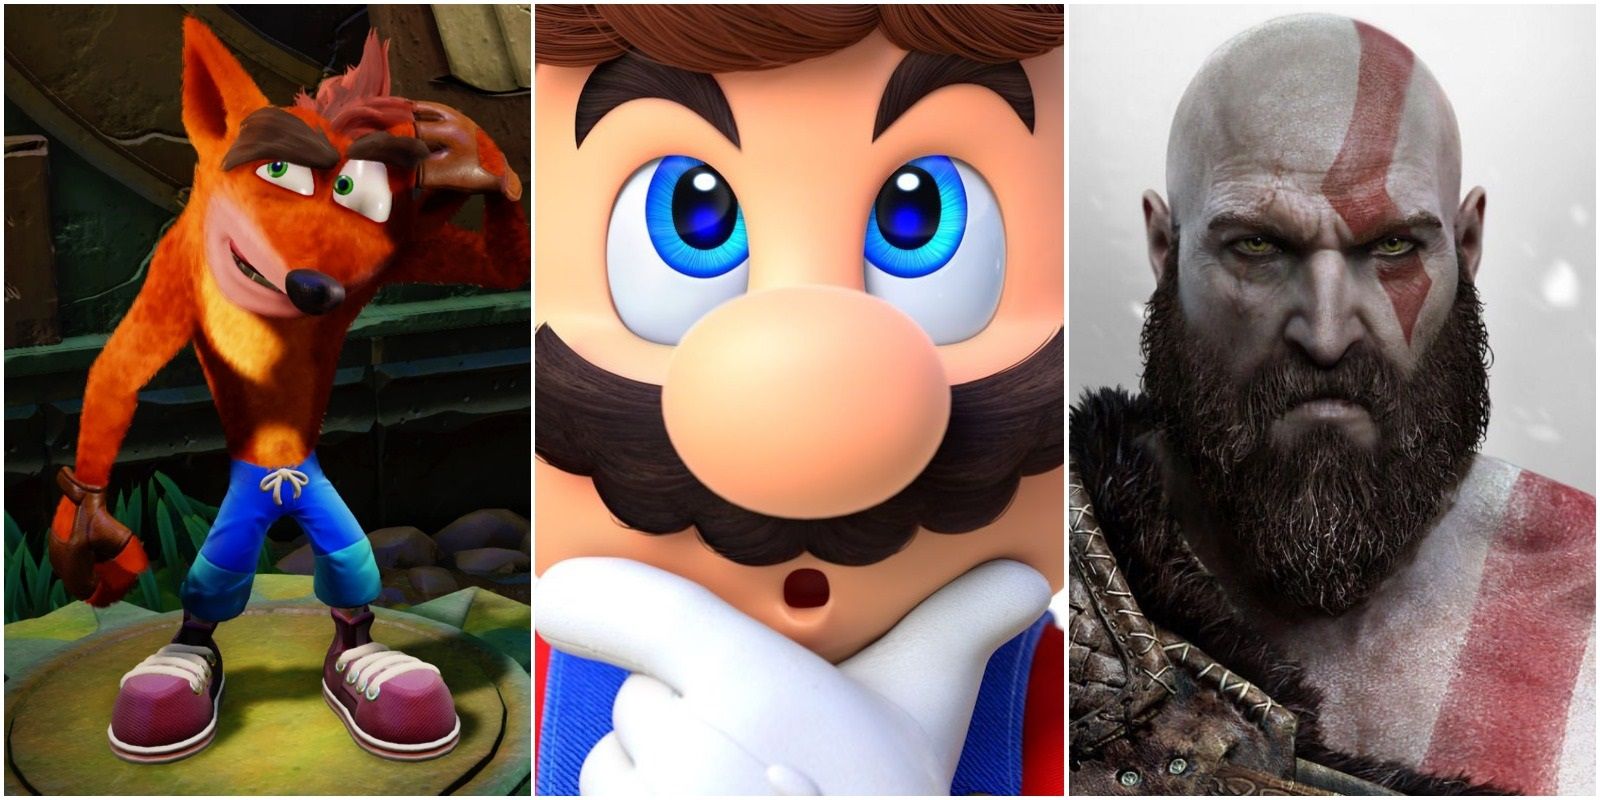 5 PlayStation Heroes Who Could Defeat Mario (& 5 Who Can't)